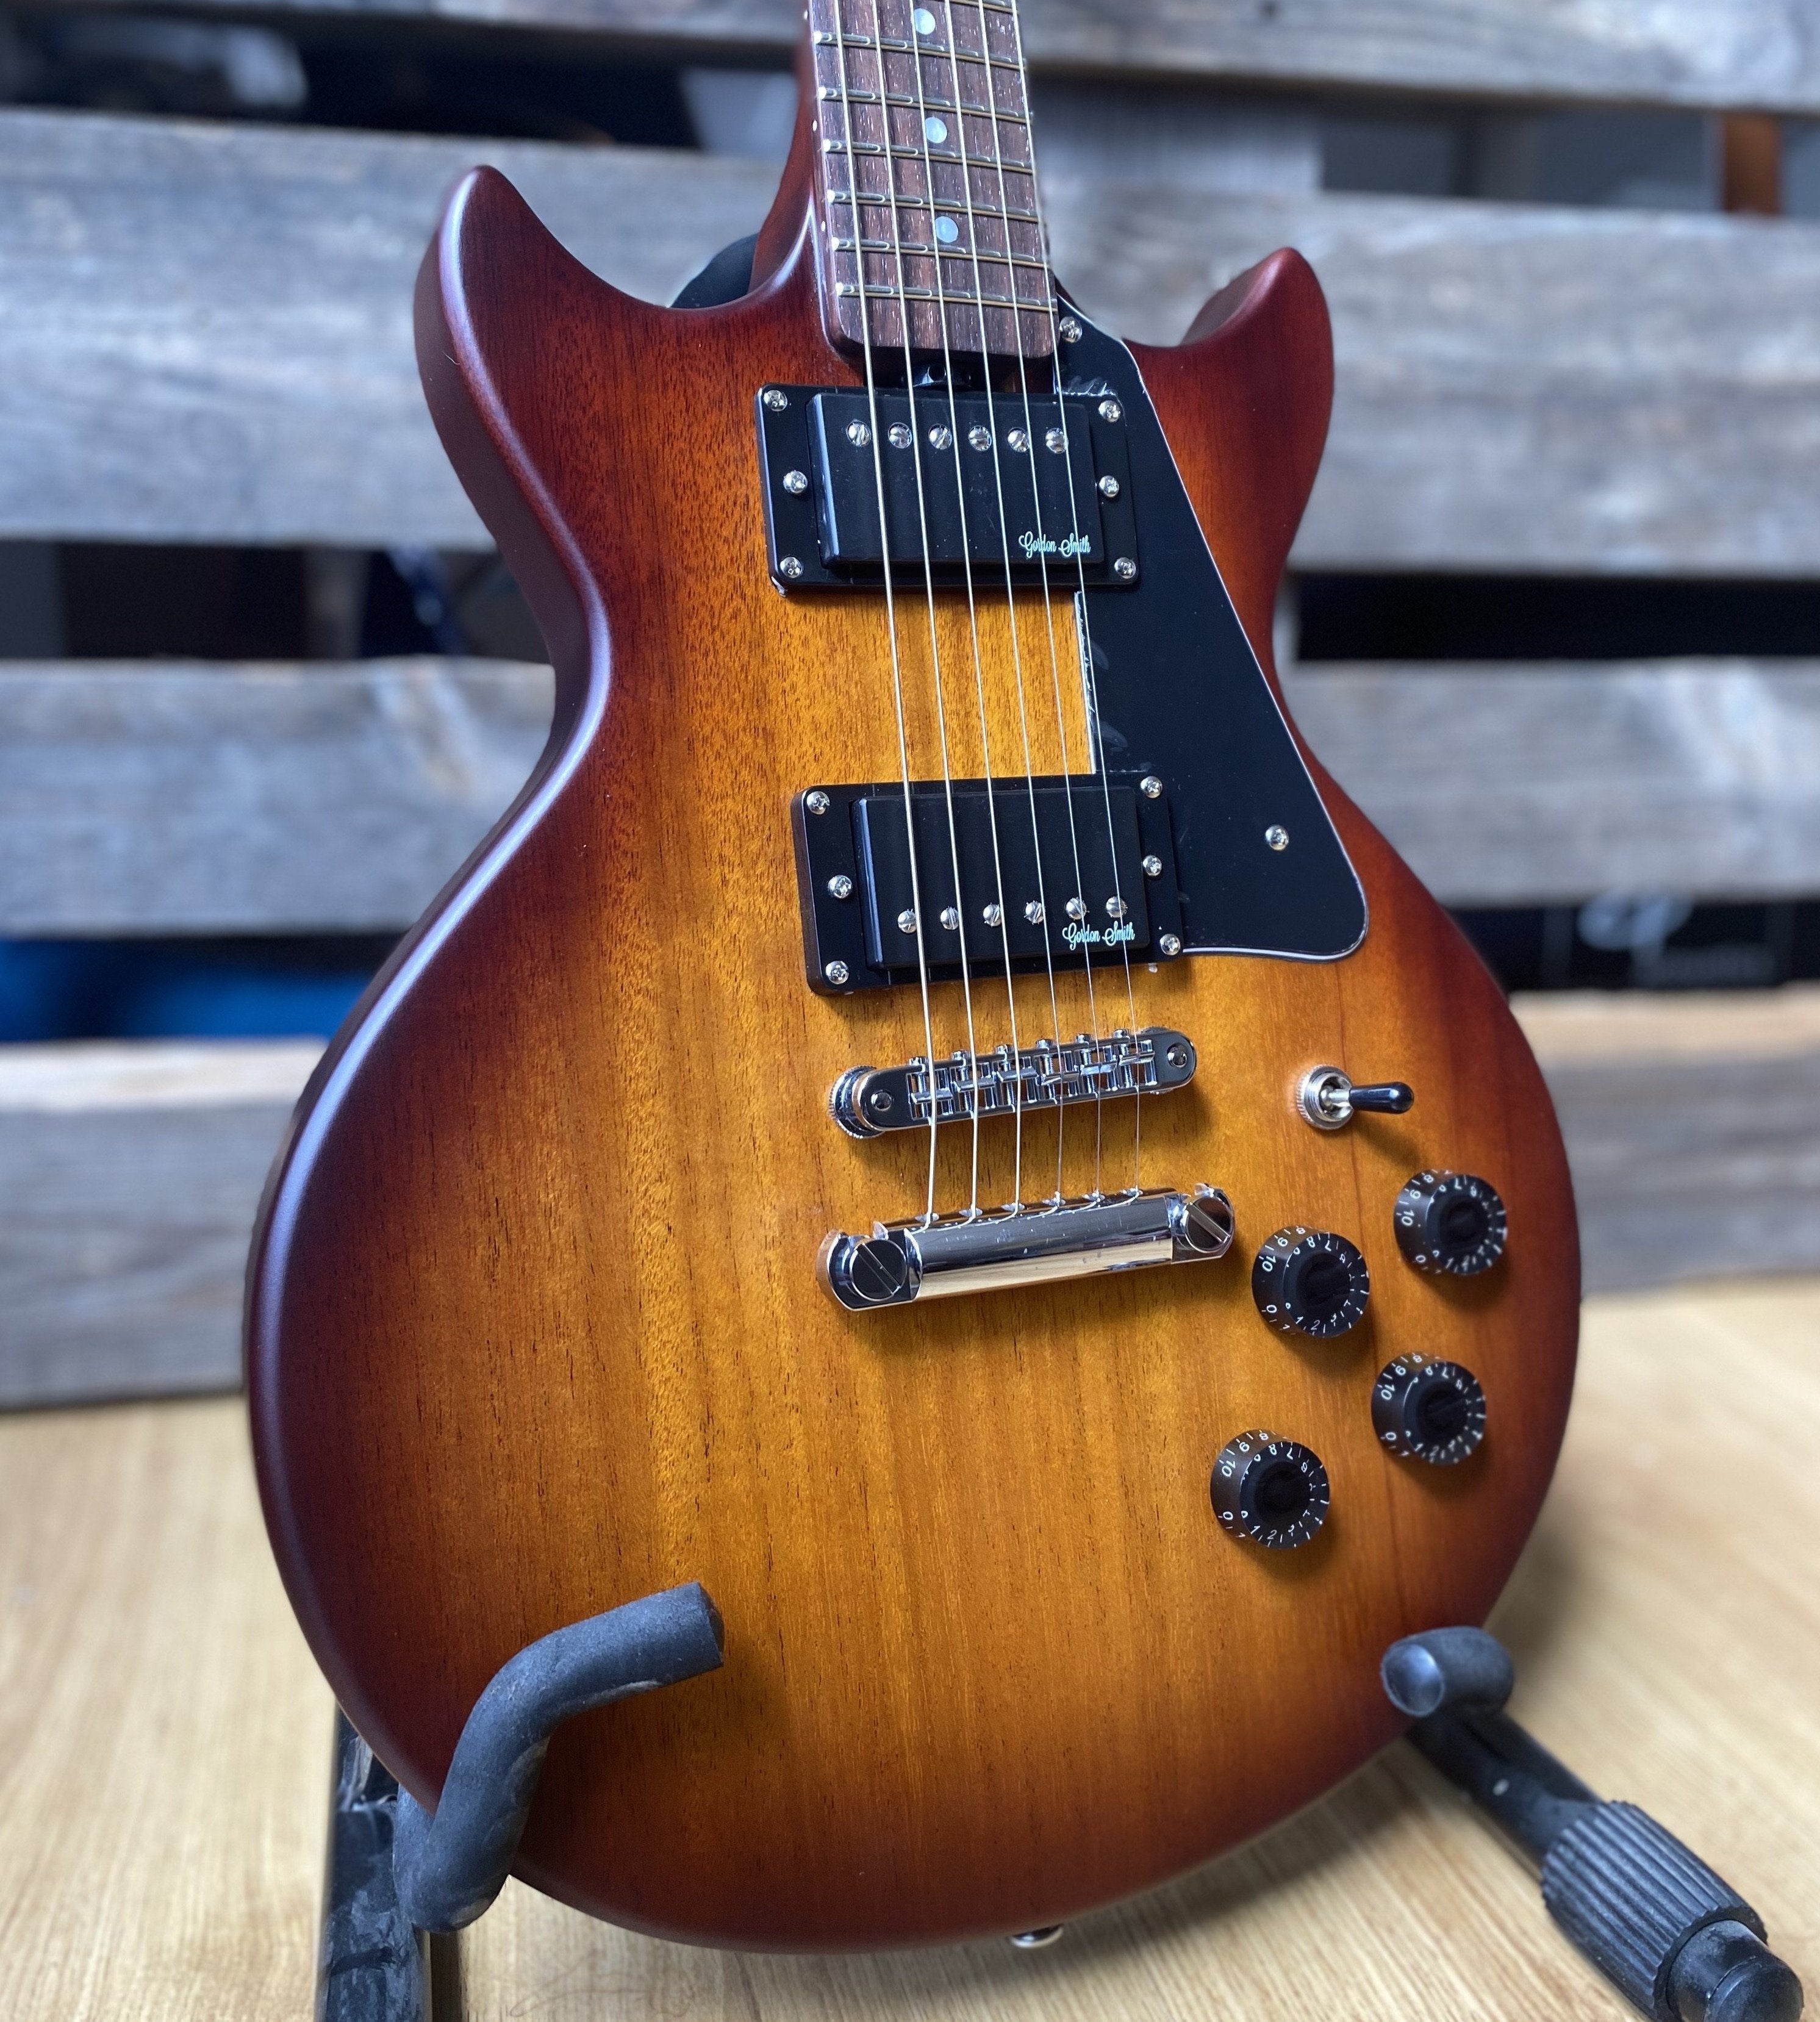 Gordon Smith GS2 HB Heritage Thick Body Full Mahogany, Electric Guitar for sale at Richards Guitars.